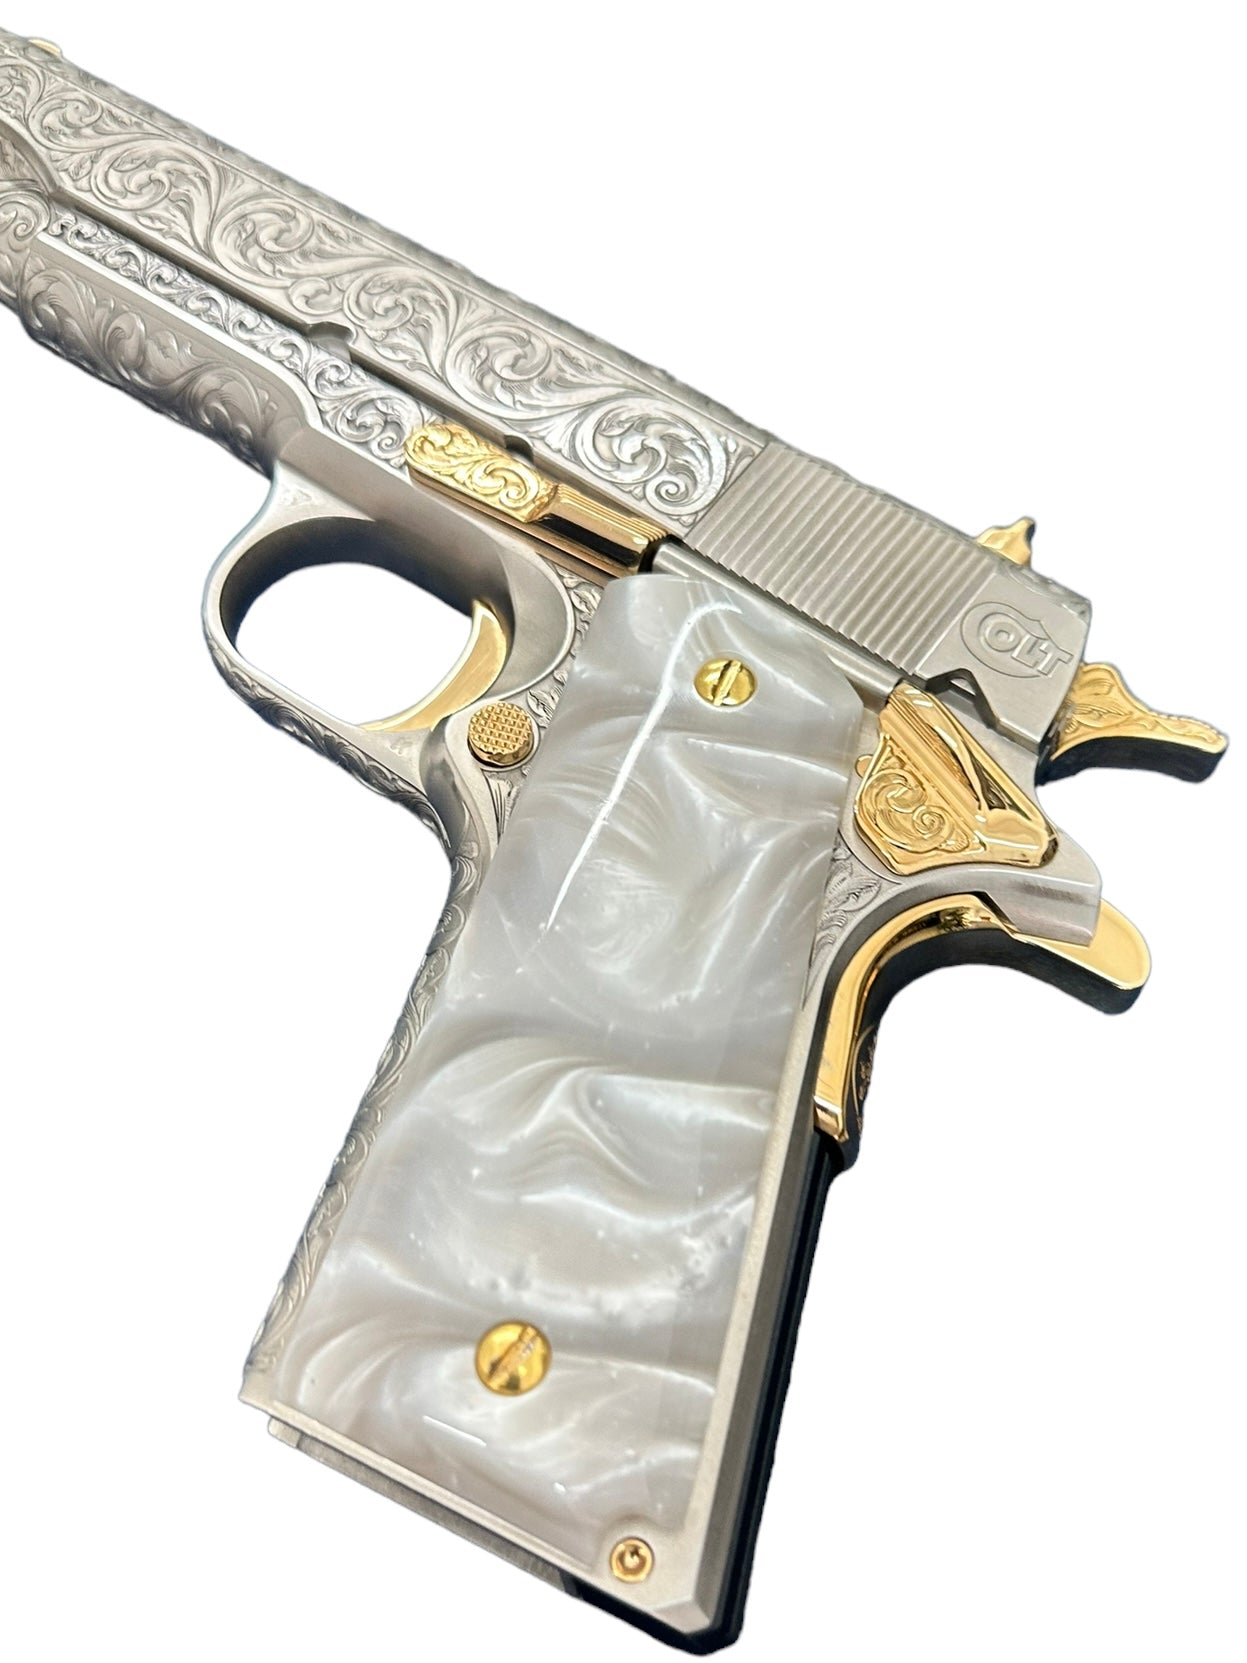 COLT CUSTOM 1911 FULLY ENGRAVED BRUSH NICKEL FINISH WITH 24K GOLD ACCENTS